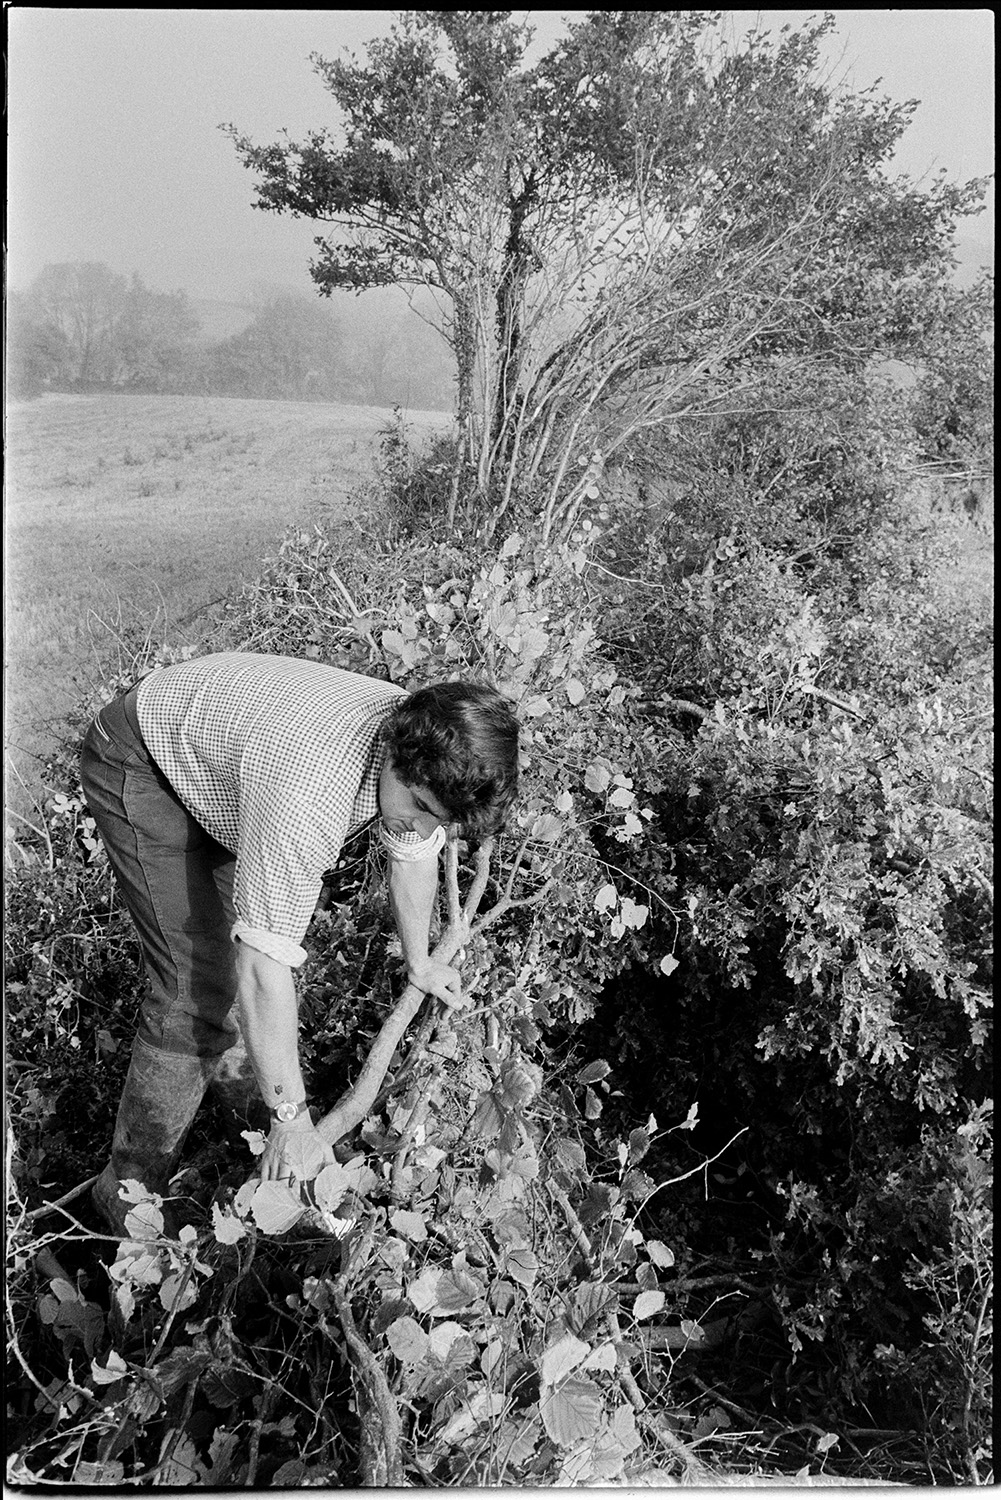 Man cutting and laying hedge. 
[Stephen Squire laying a hedge at Lower Langham, Dolton. He is bending a branch along the hedgerow.]